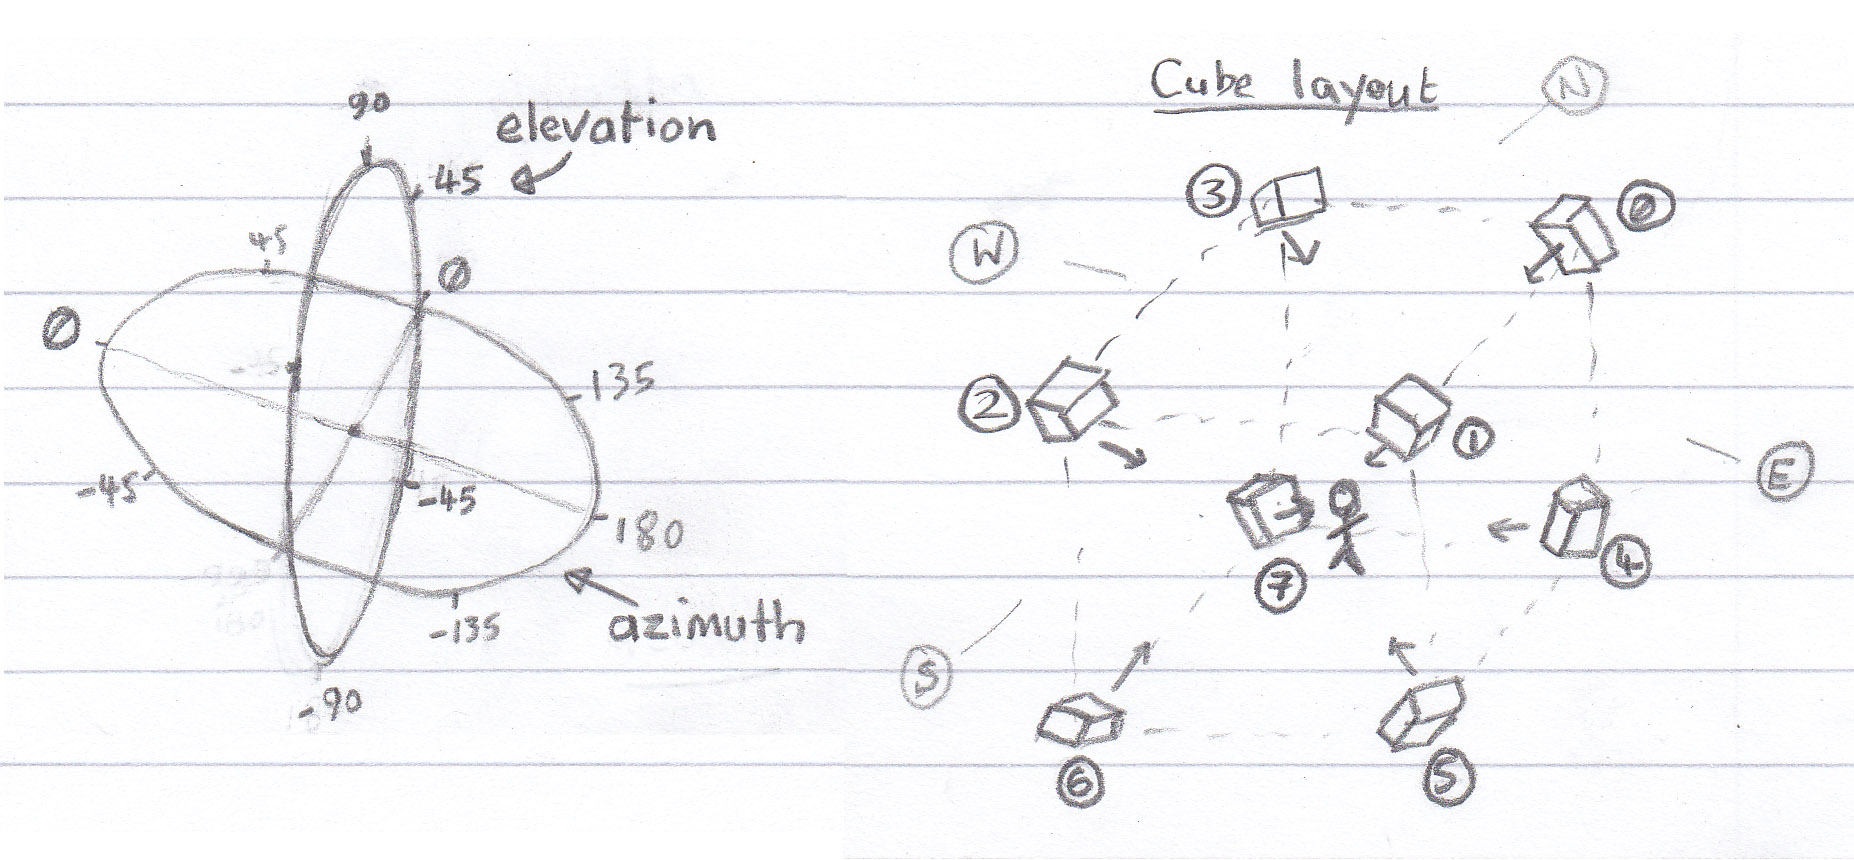 Sample values sketched along ezimuth and elevation, and a sketch showing a listener at the center of a cube layout